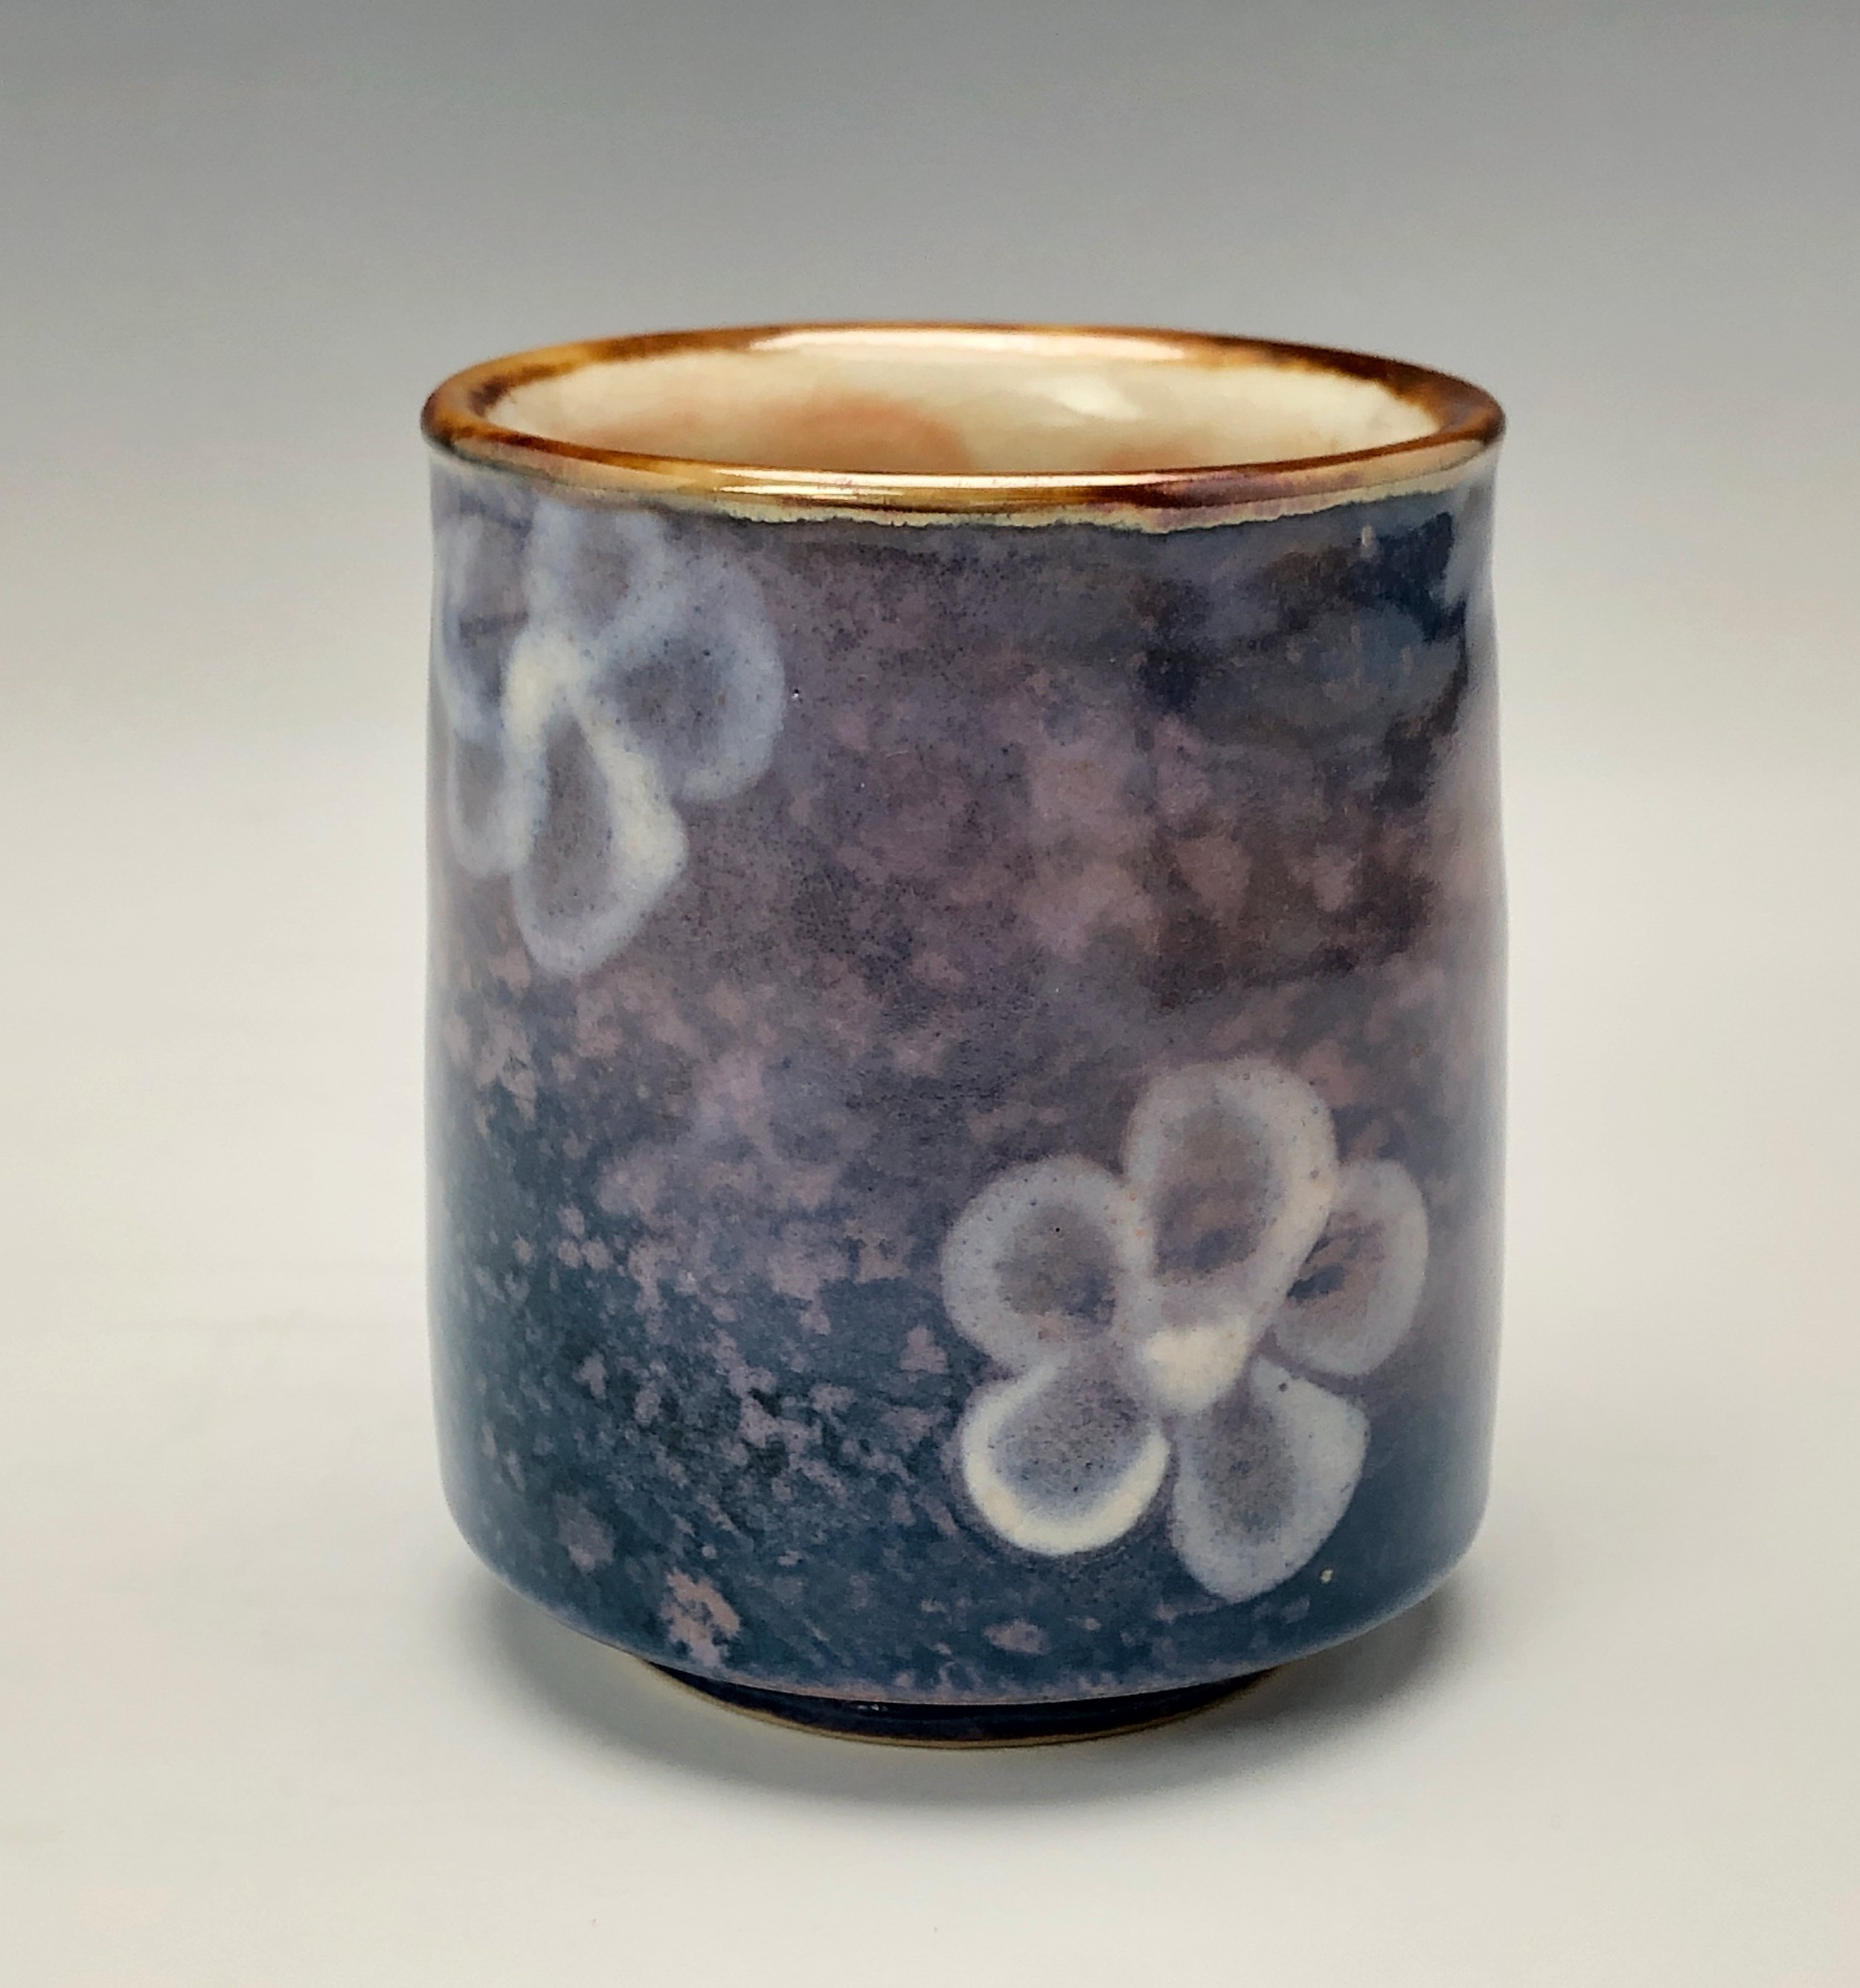  Bruce Gholson, Bulldog Pottery, Seagrove, North Carolina  Yunomi 4- Casual drinking cup made from porcelain. This cup is glazed with a lavender blue shino with a drawn fish in red over glaze. 